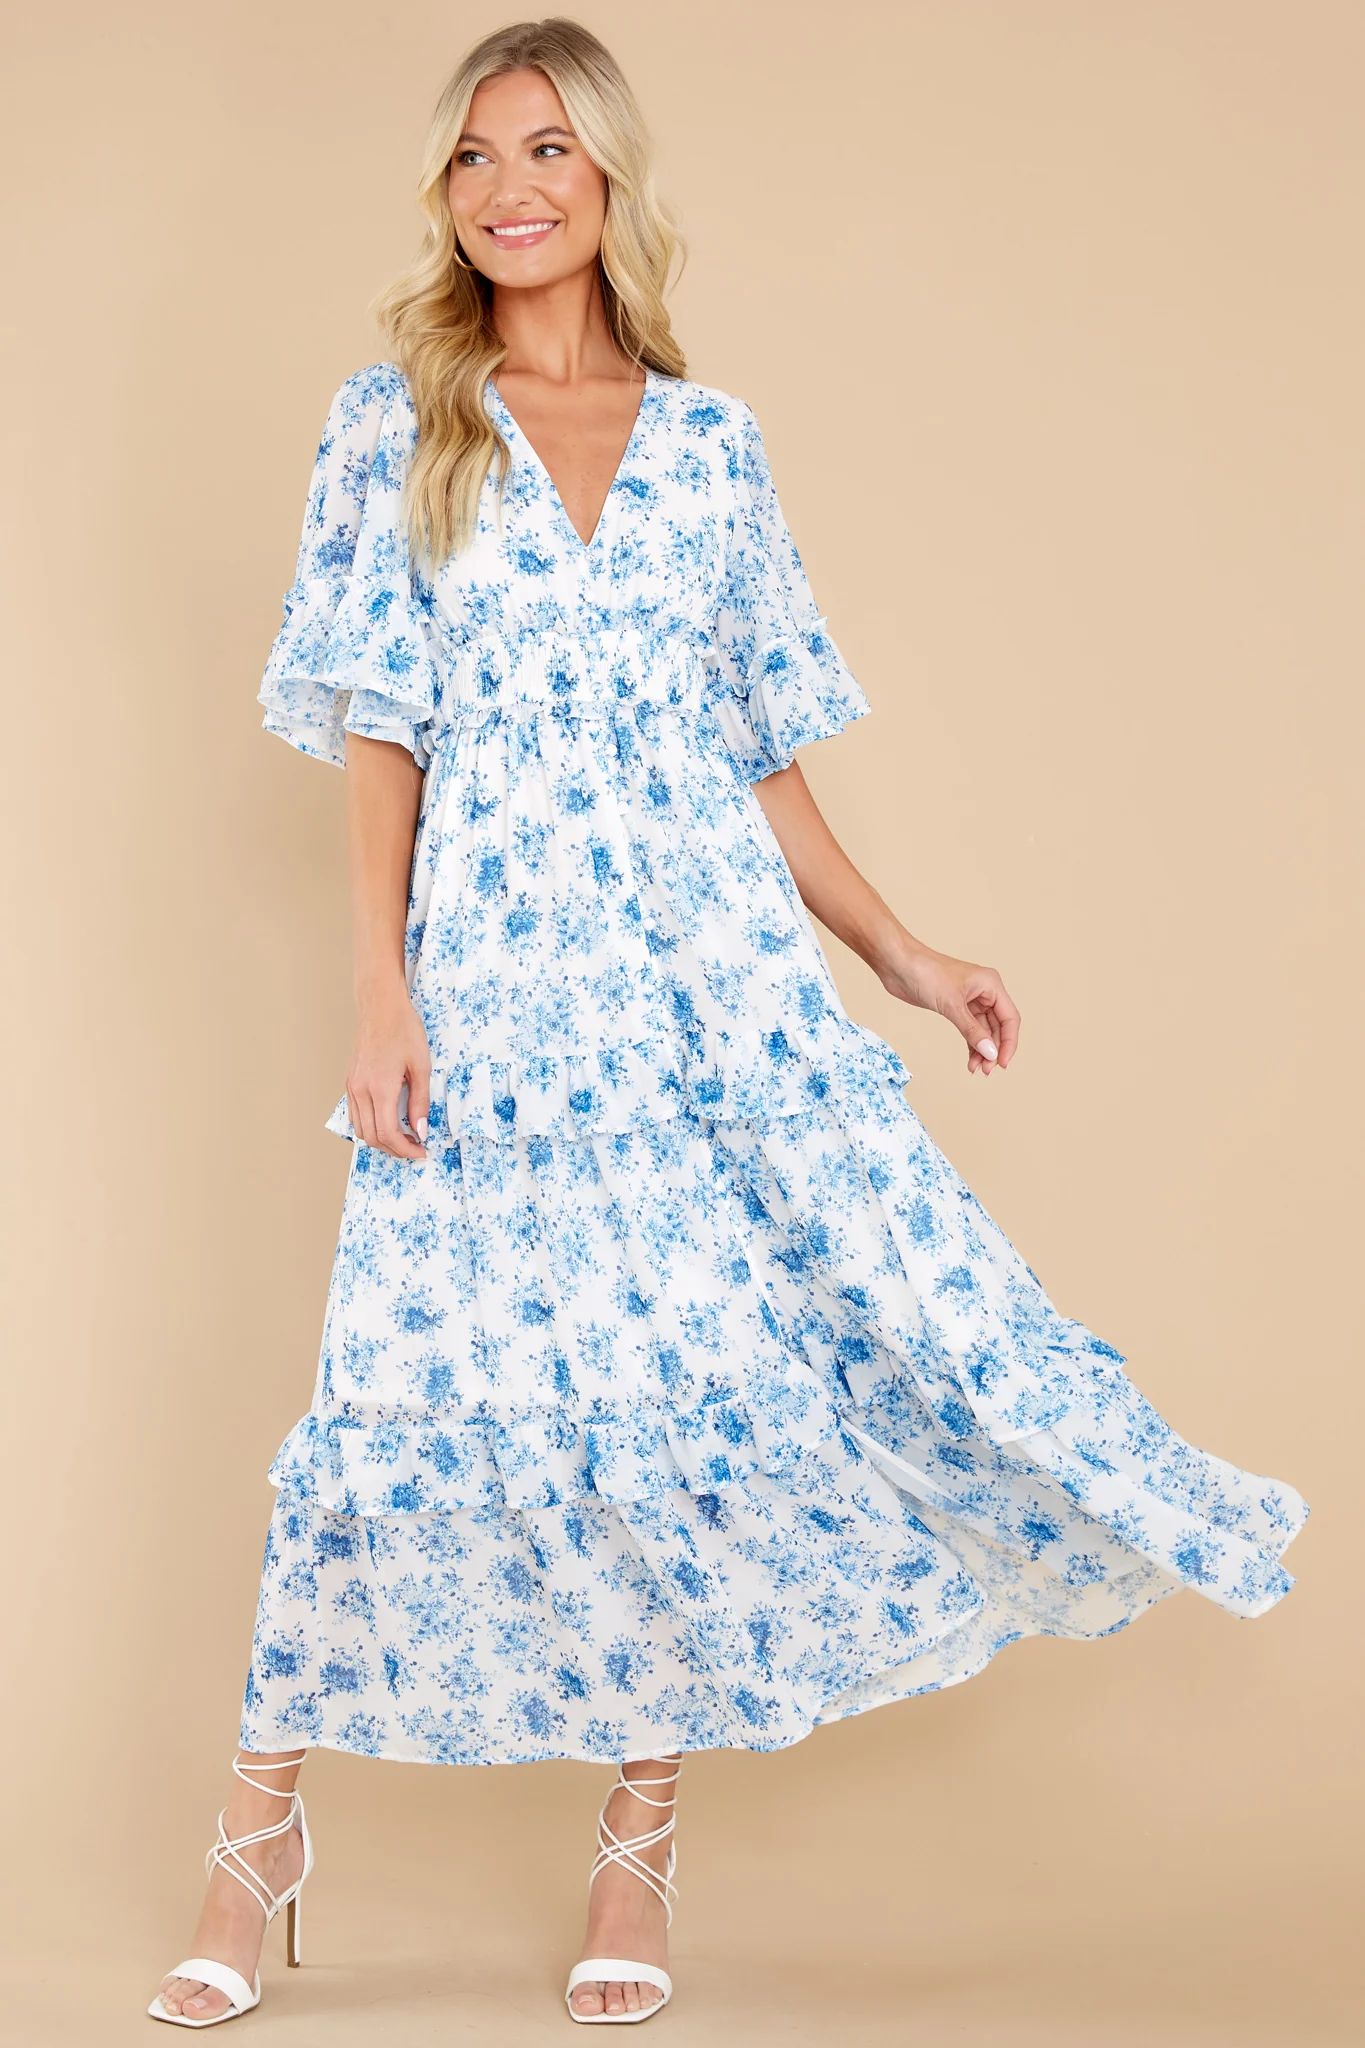 Bright Mornings White And Blue Floral Print Maxi Dress | Red Dress 